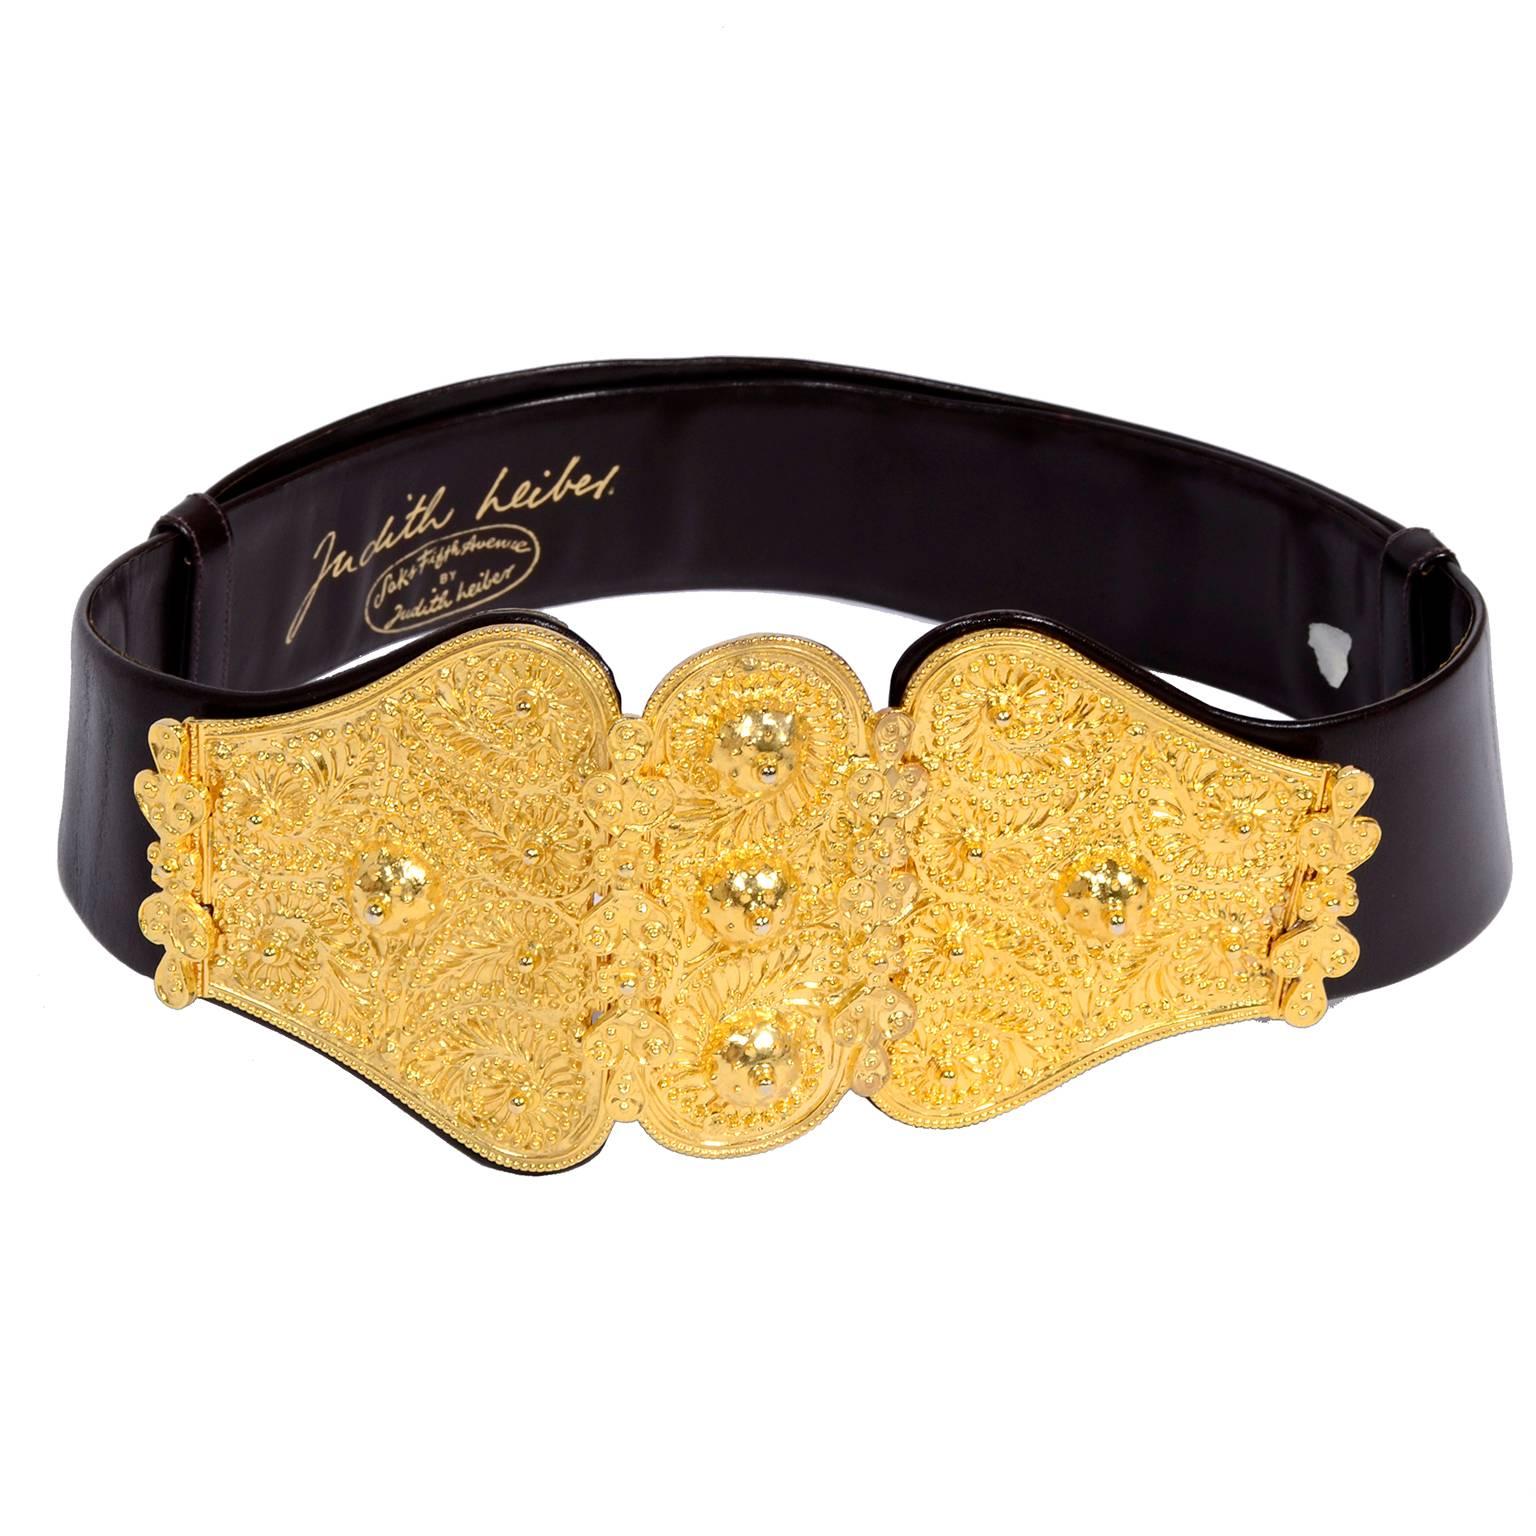 This is a wonderful vintage Judith Leiber leather belt with a gold metal buckle. The buckle has three sections, two attached by a hinge and the third hooks to close. It has an ornate design and beautiful texture. We love the dramatic gold buckle and